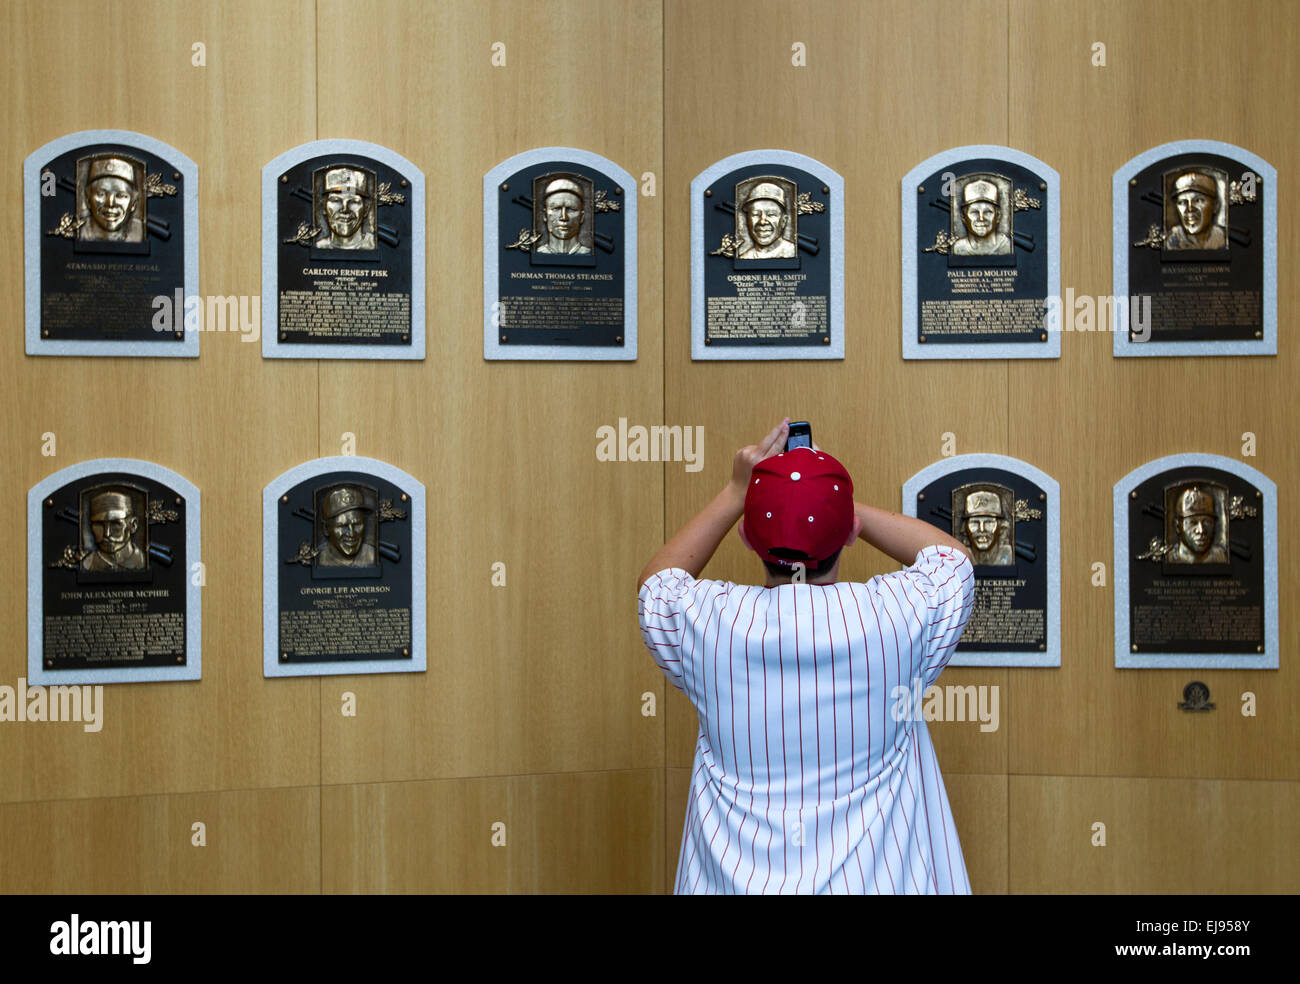 Fan de baseball au National Baseball Hall of Fame and Museum de Cooperstown, New York Banque D'Images